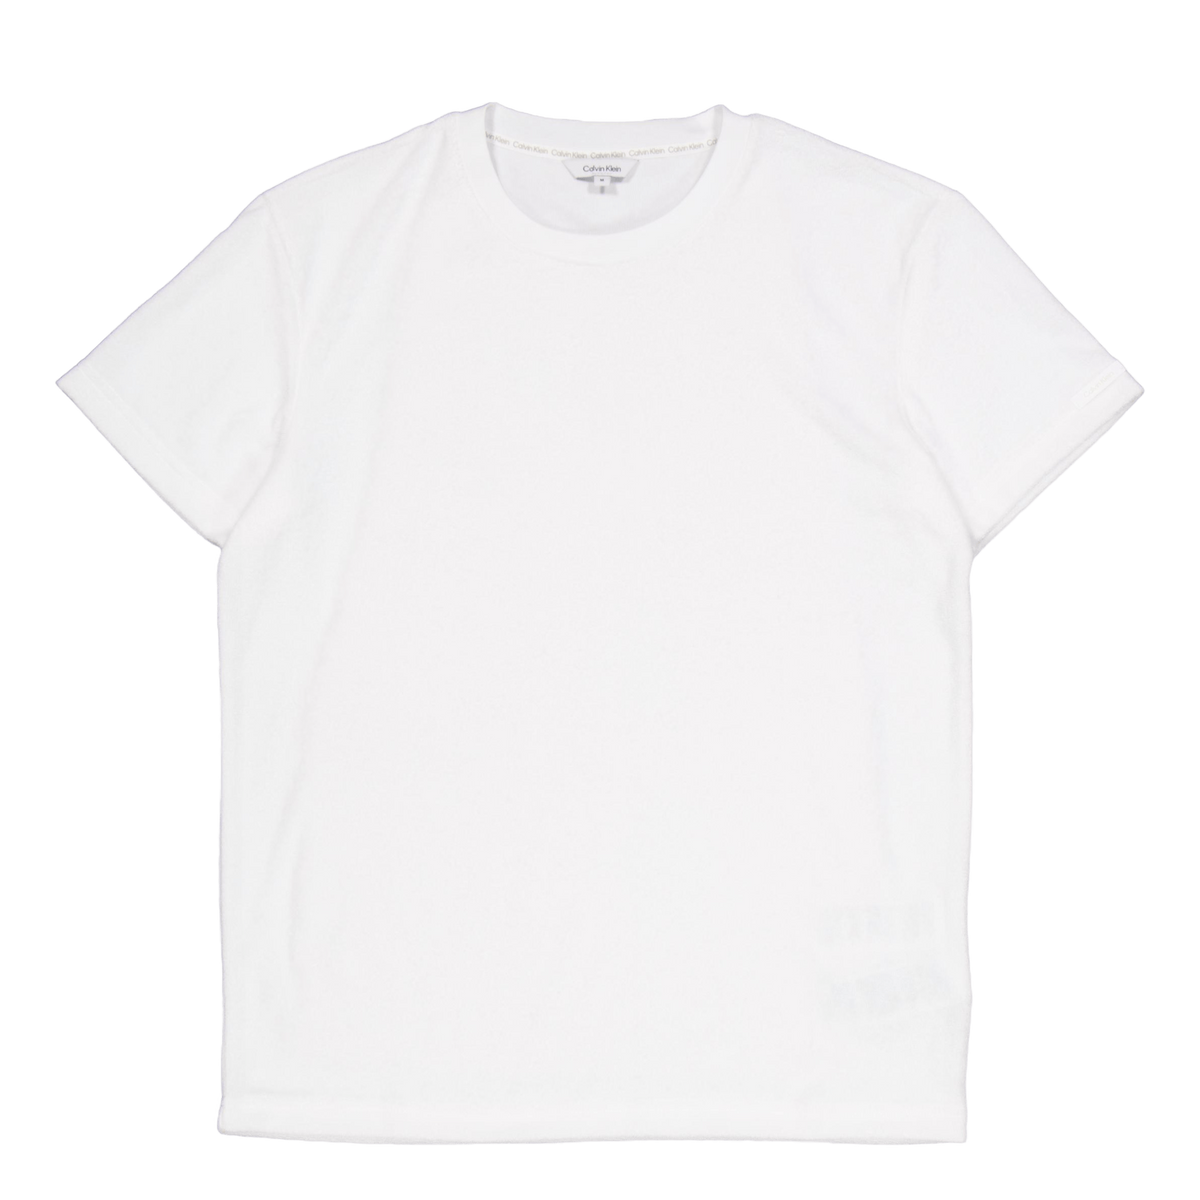 Crew Neck Towelling Tee Ycd-pvh Classic White